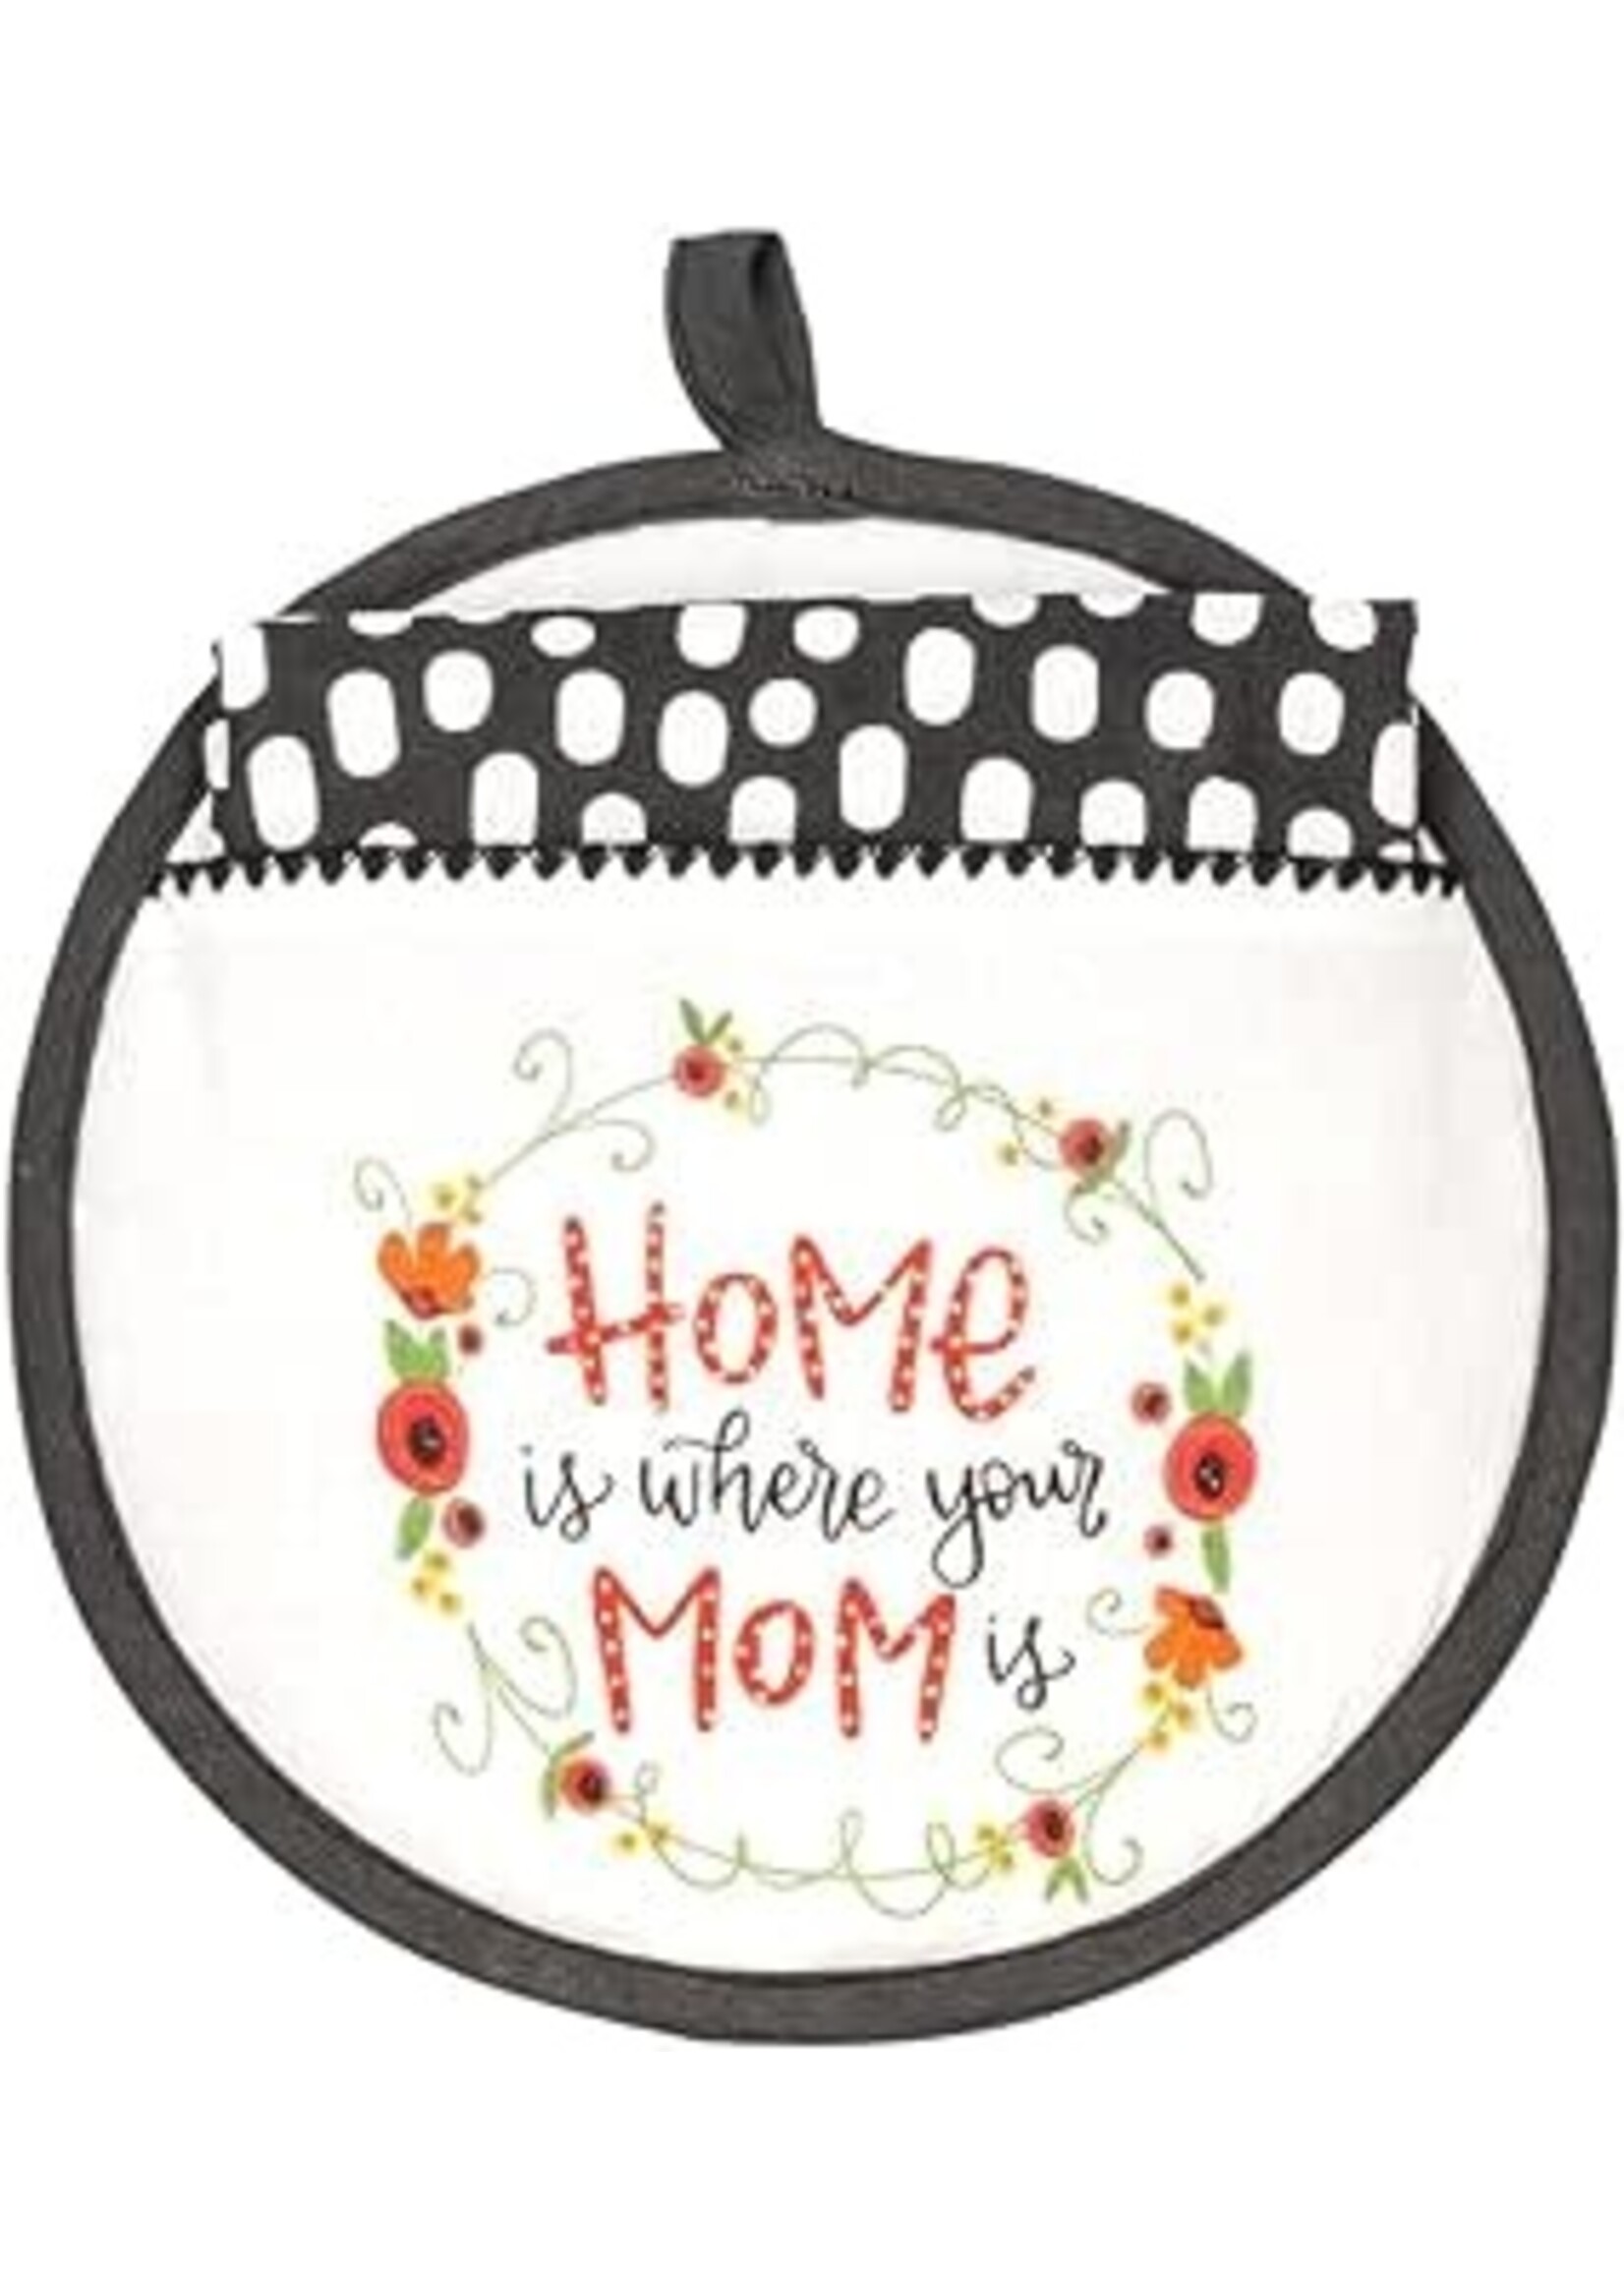 Hotpad /Towel Set: Home is Where Your Mom is